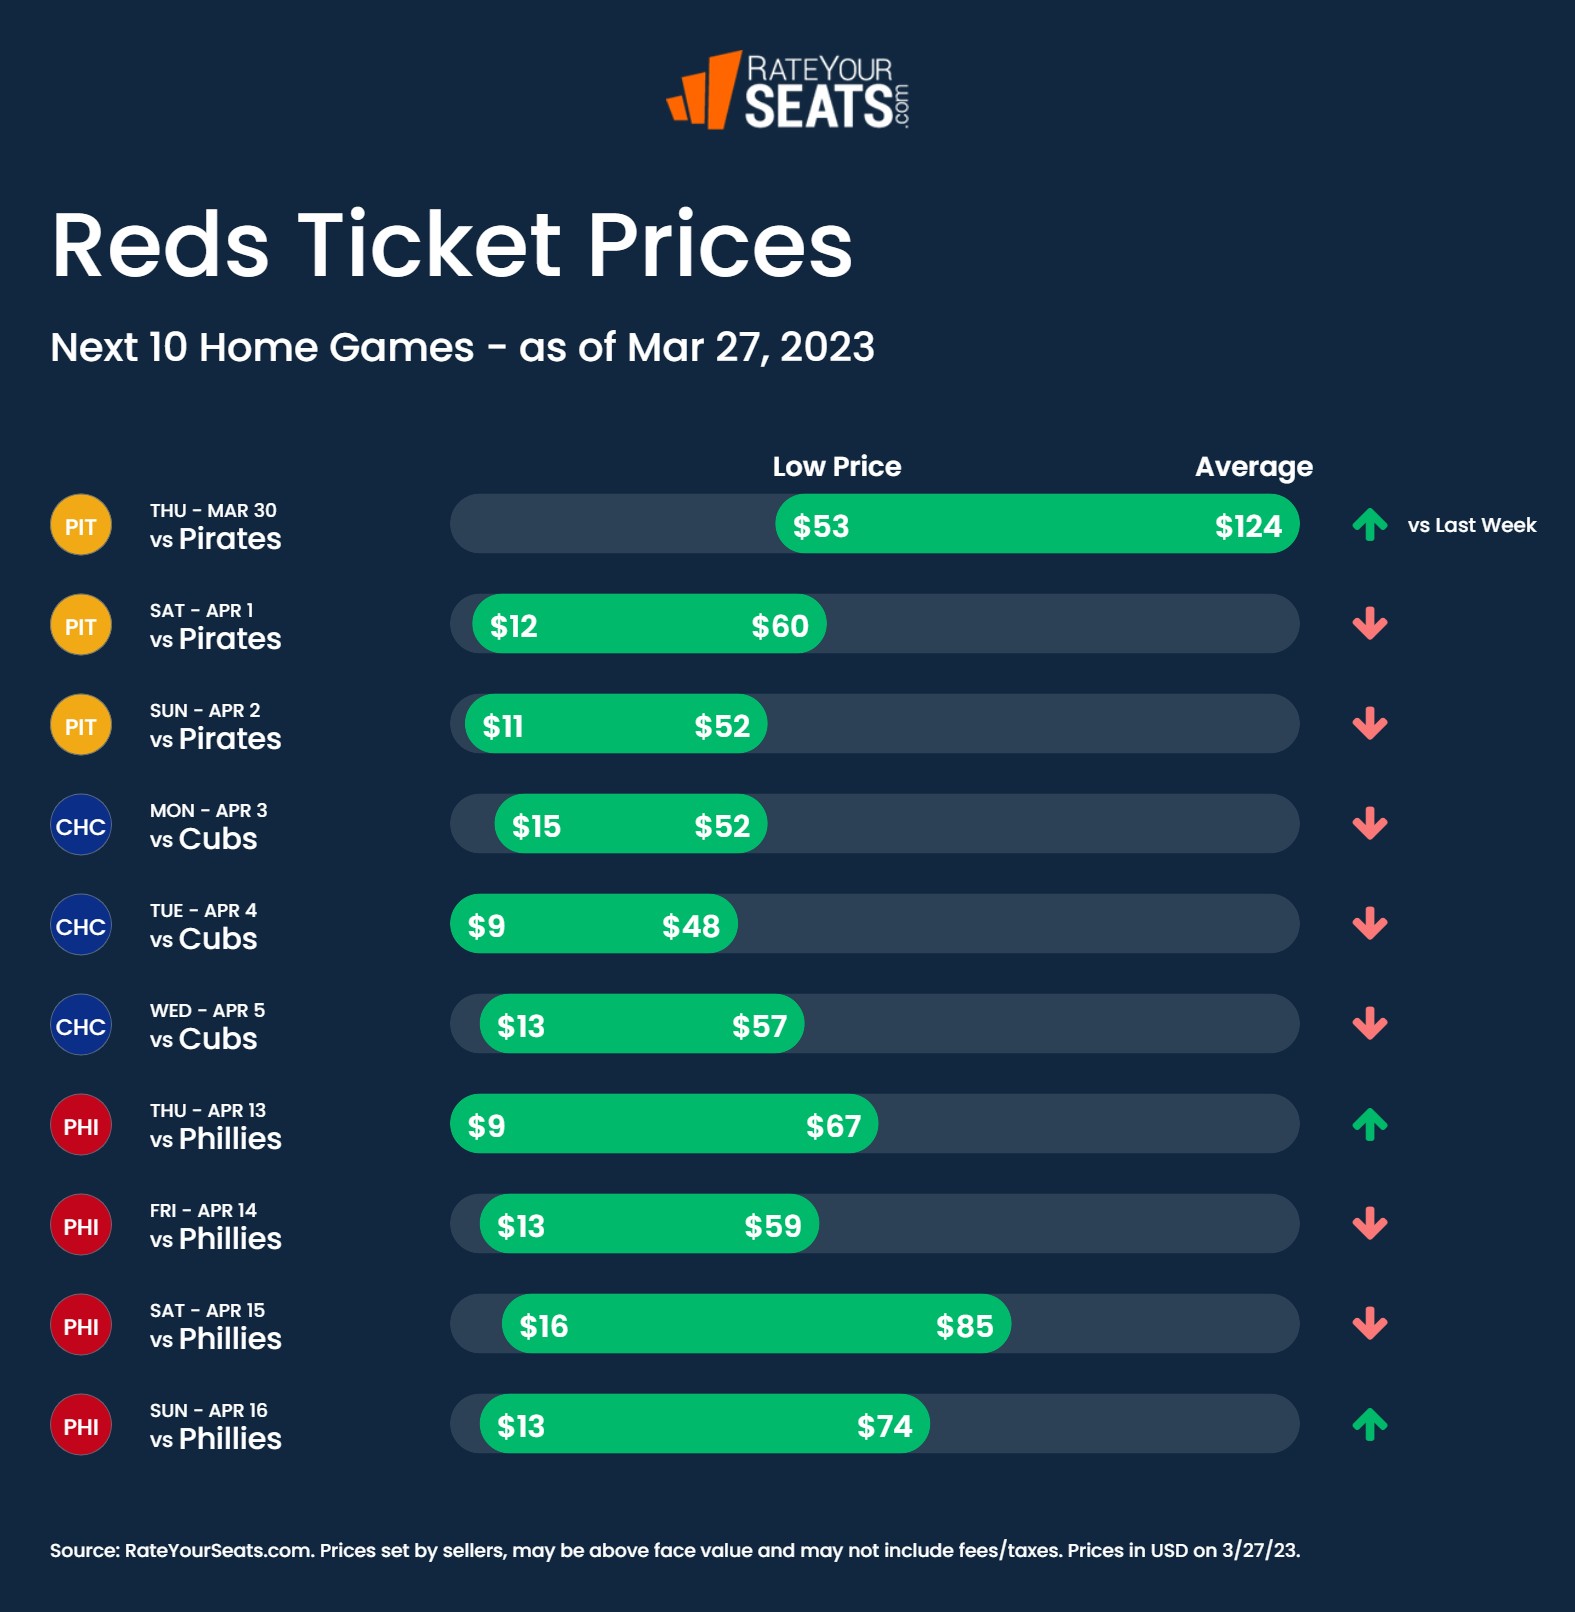 Reds tickets pricing week of March 27 2023